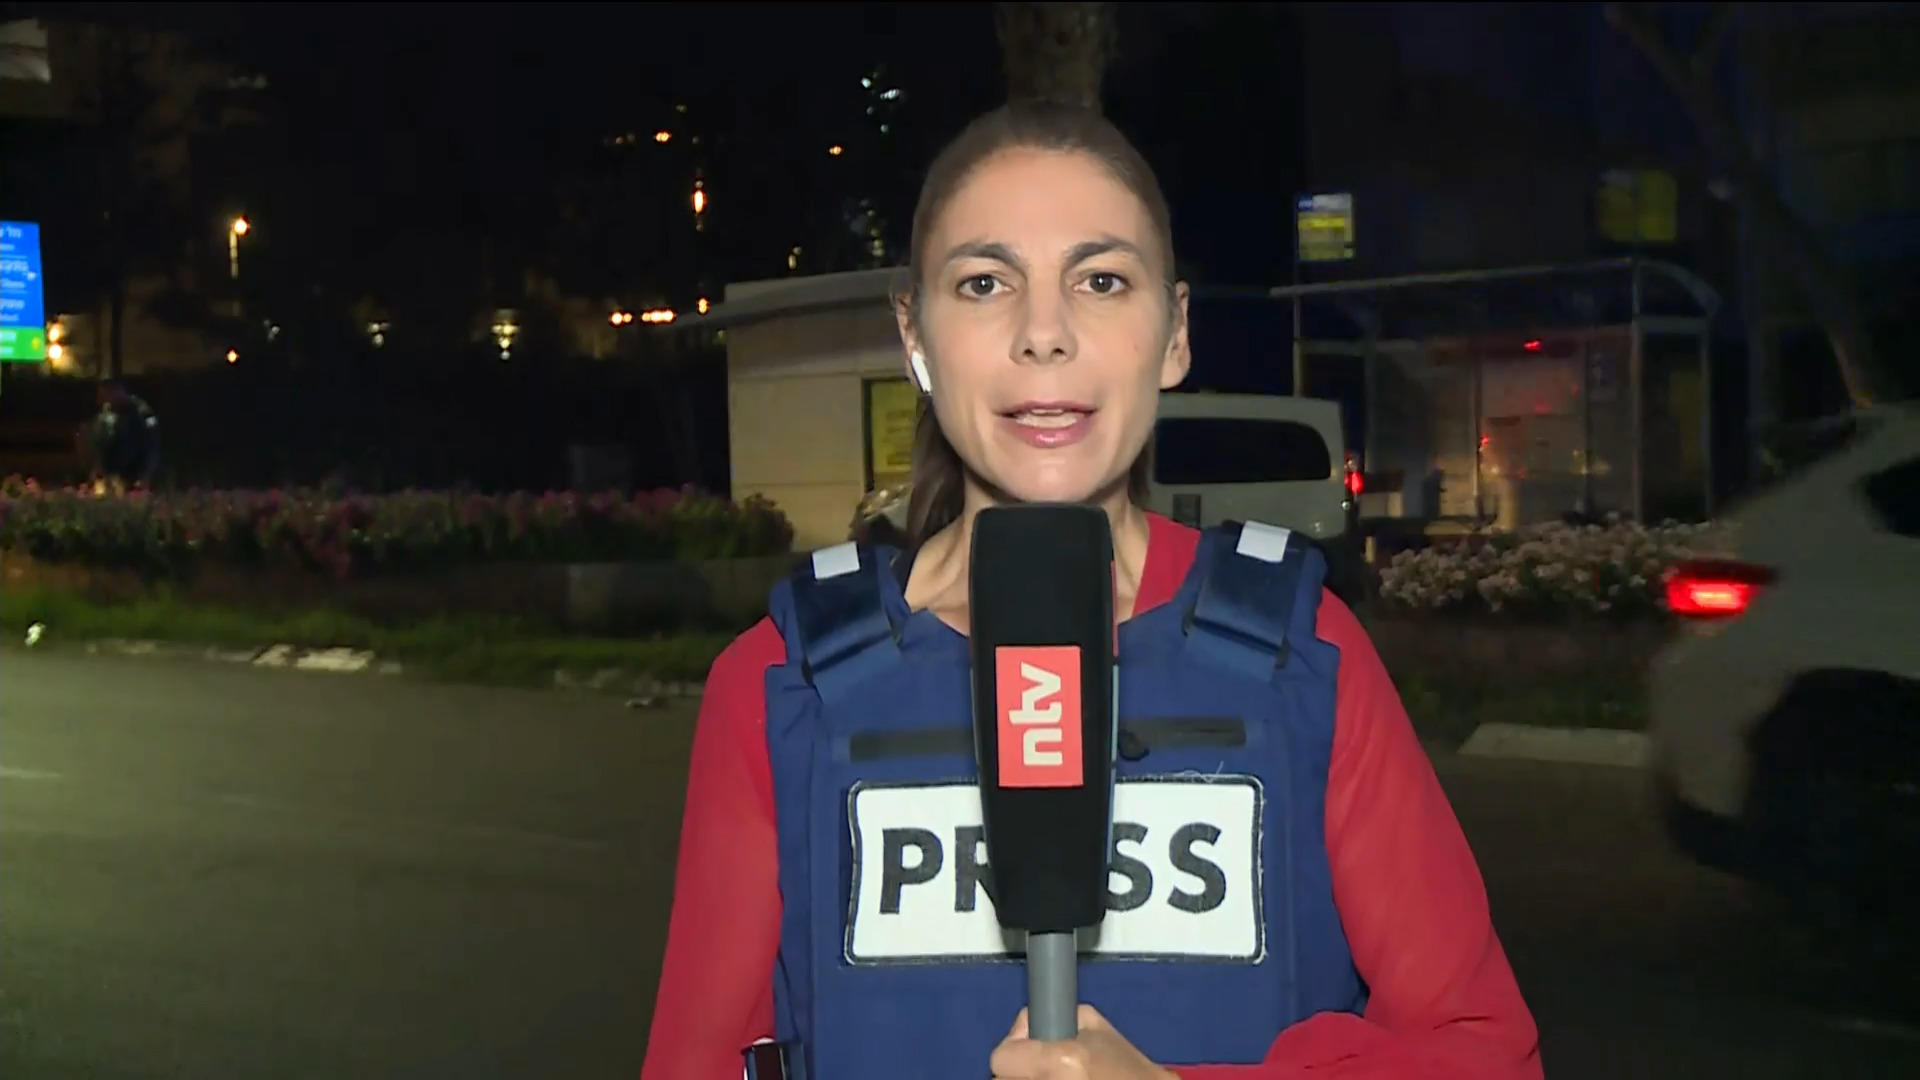 This is how Israel is preparing for a ground offensive. RTL/ntv reporter from military zone